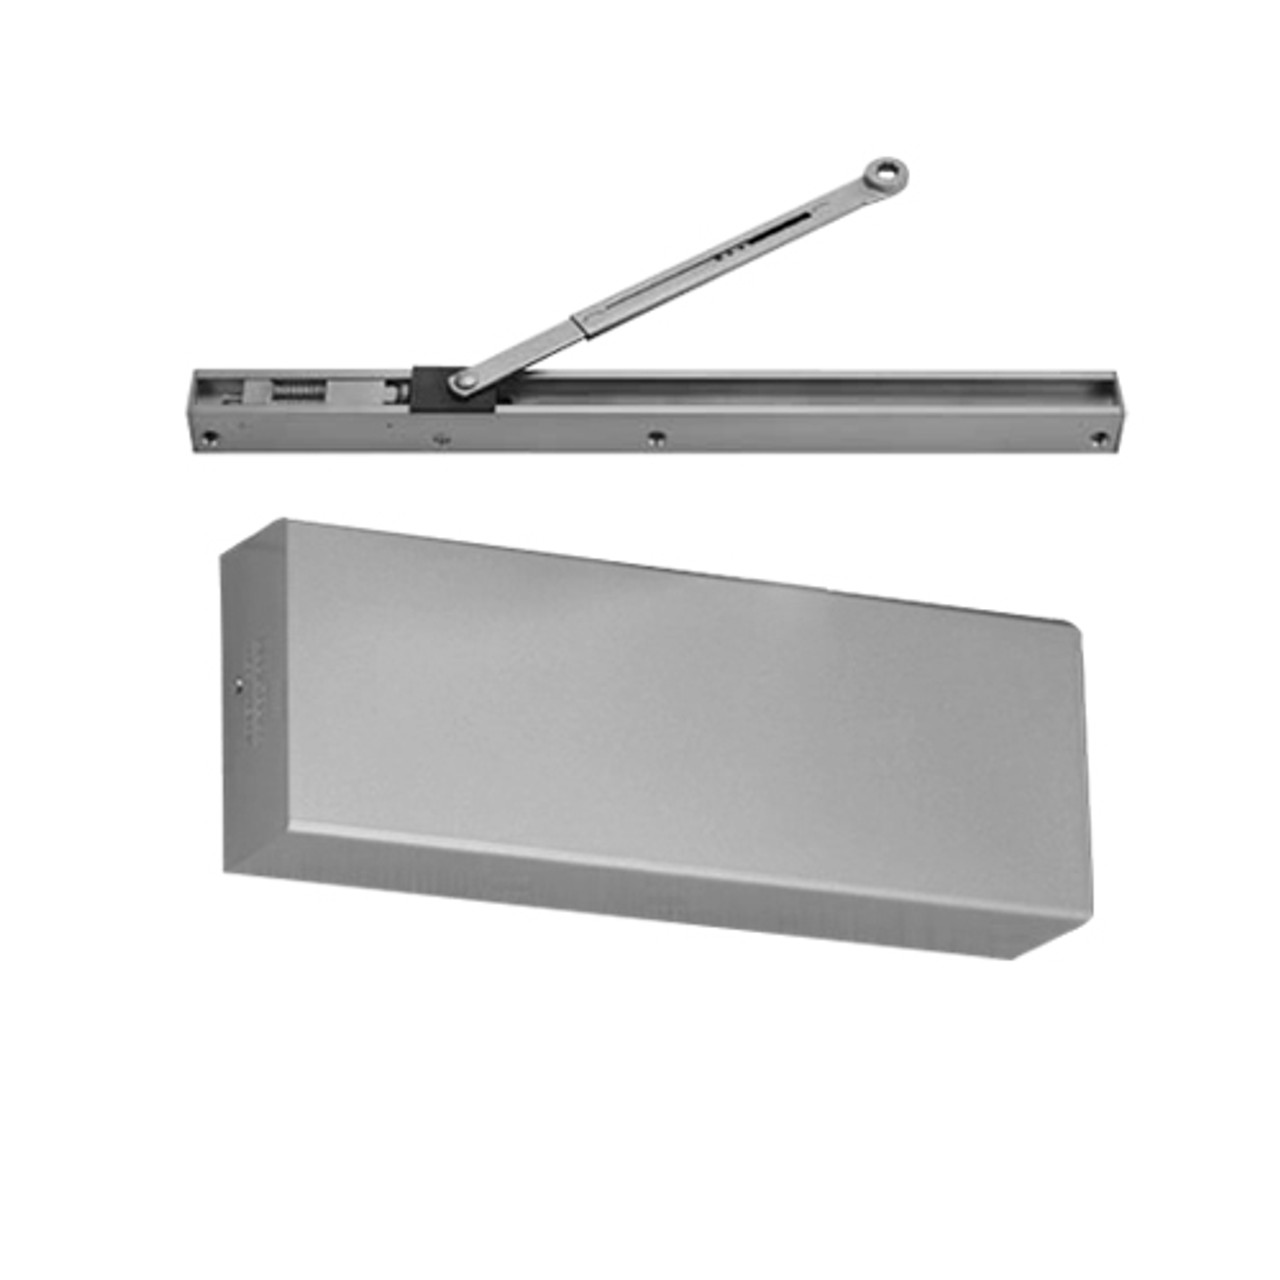 9500STHM-689 Norton 9500 Series Hold Open Cast Iron Door Closer with Pull Side Slide Track in Aluminum Finish